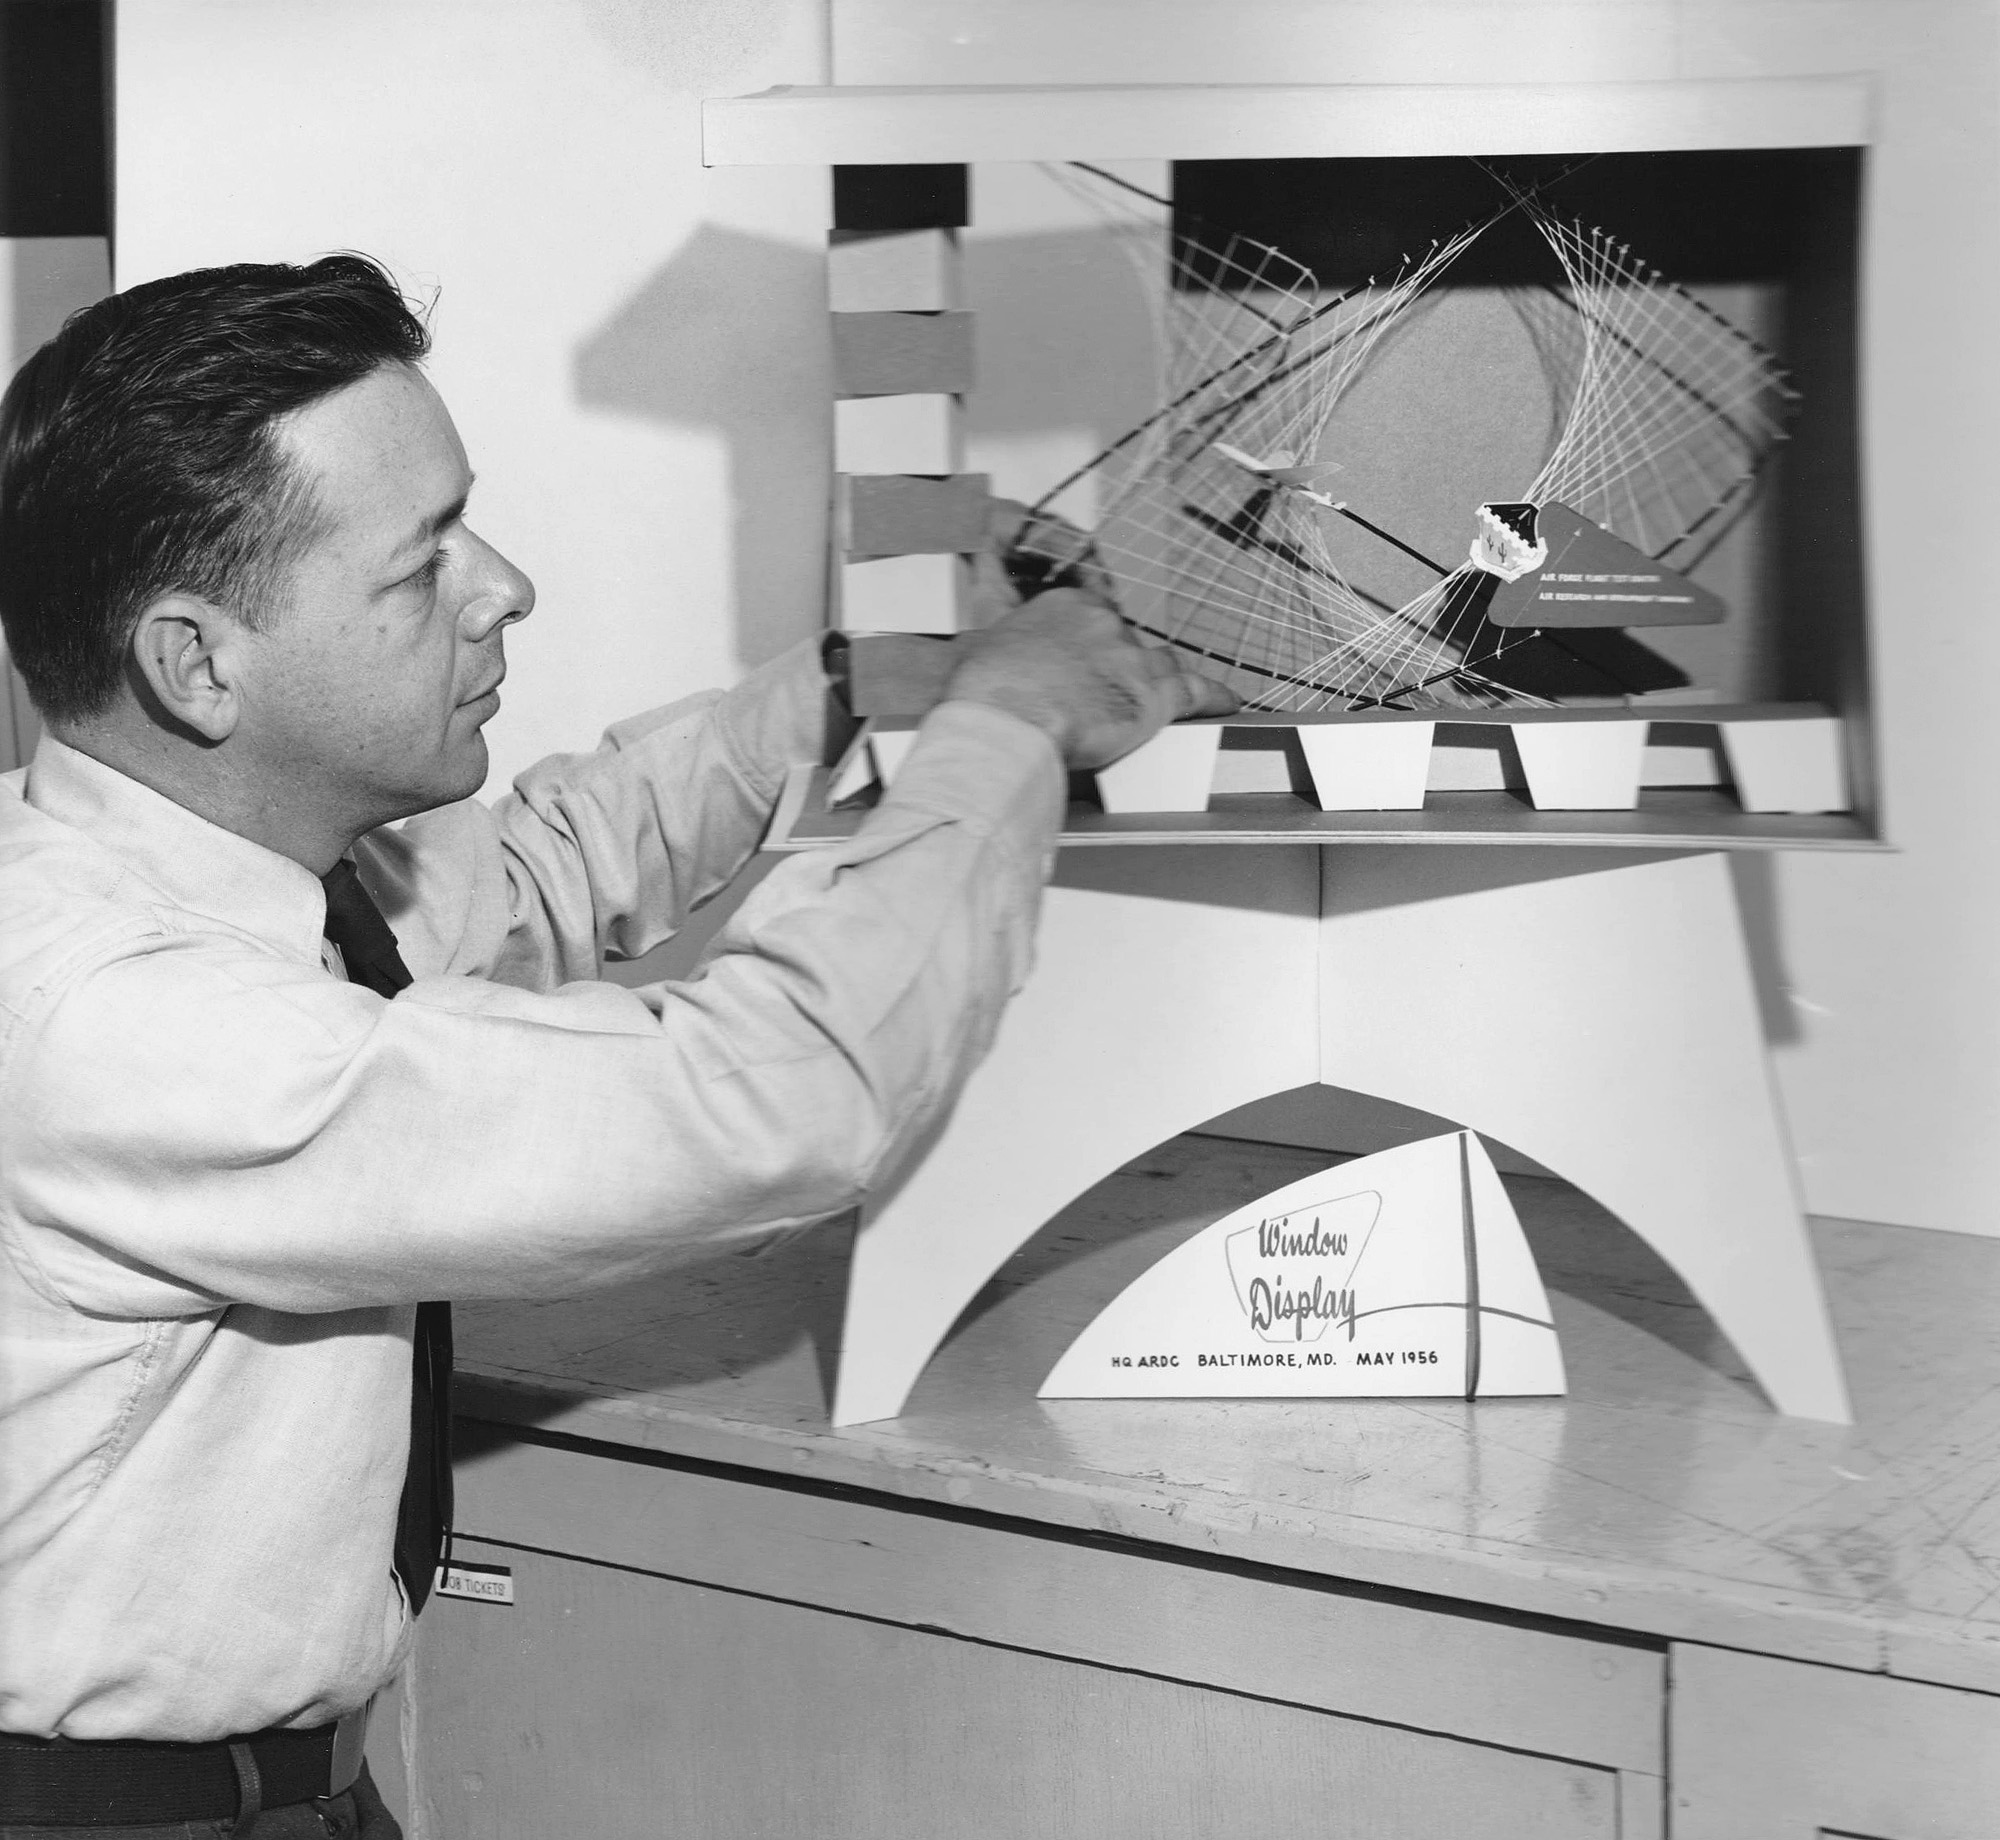 My Dad, Gordon Clevenger,at Edwards AFB, California, circa 1962, with one of his designs. He got his first job in a sign shop in Chicago, Illinois, as a young boy, and was still working as a "sign man" up until his death in 2002. He retired from the Air Force in 1963 after serving in WWII and Korea. View full size.